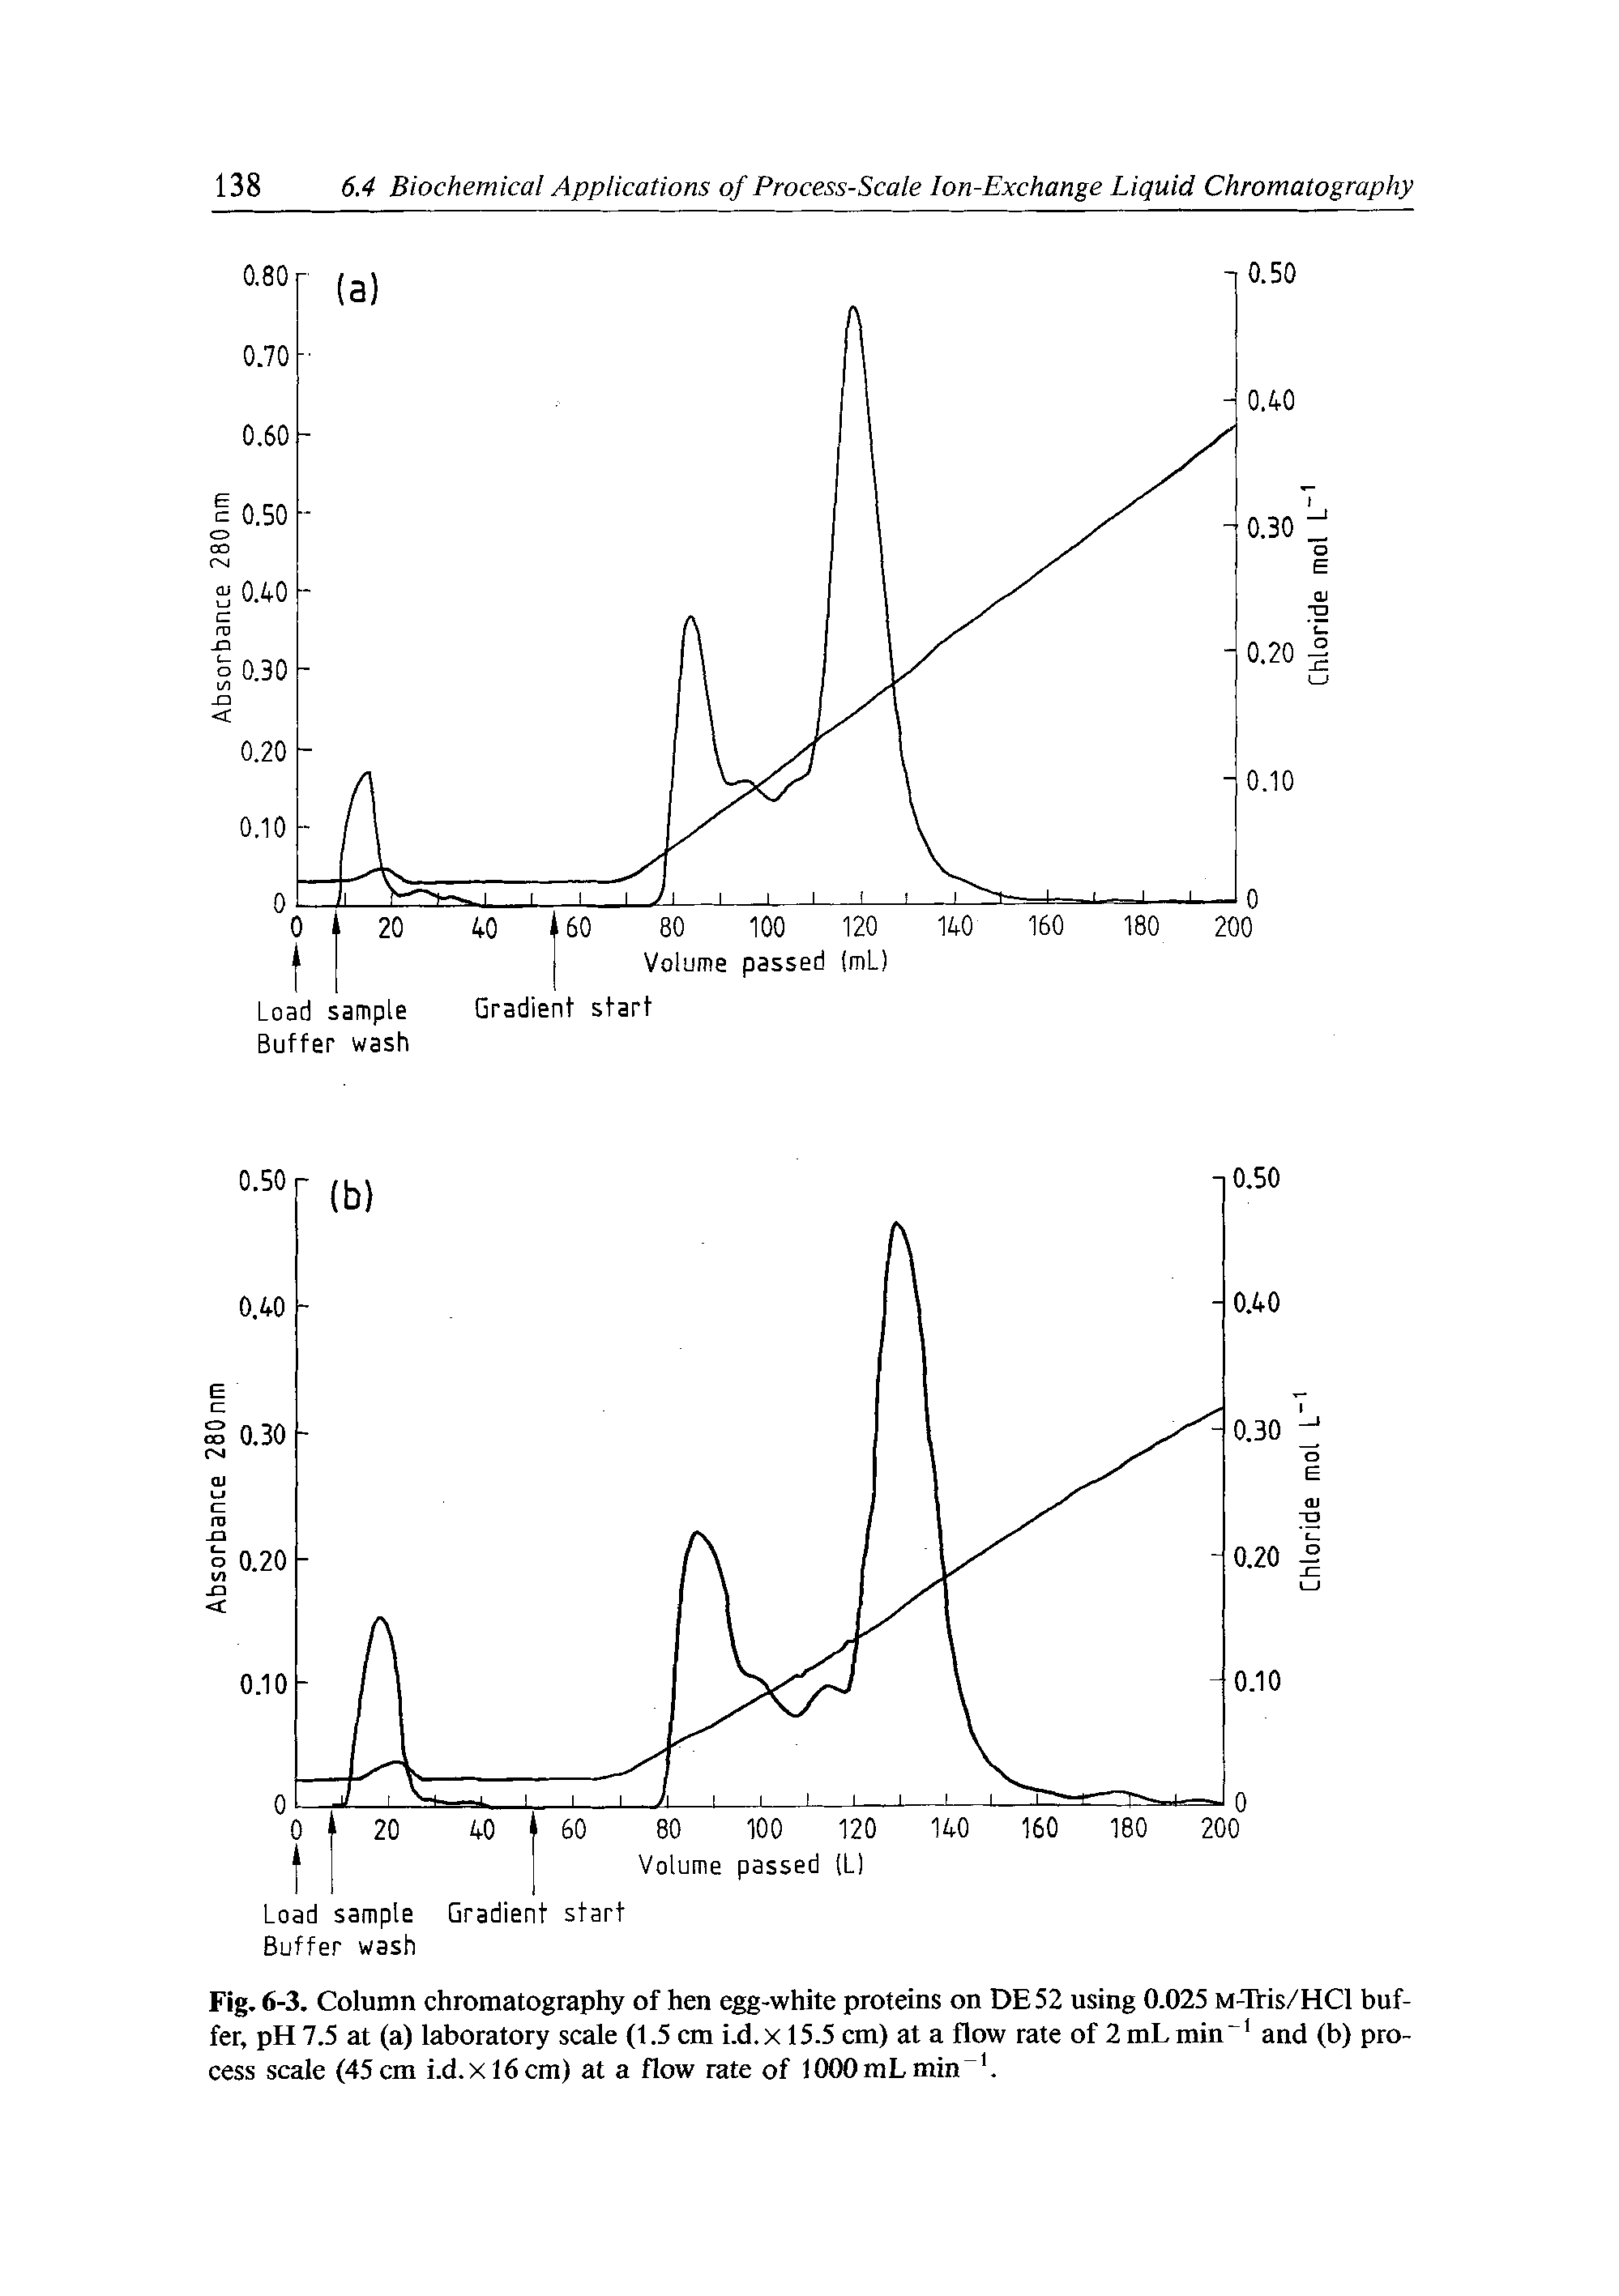 Fig. 6-3. Column chromatography of hen egg-white proteins on DE52 using 0.025 M-Tris/HCl buffer, pH 7.5 at (a) laboratory scale (1.5 em i.d. x 15.5 cm) at a flow rate of 2 mL min and (b) process scale (45 cm i.d.xl6cm) at a flow rate of lOOOmLmin. ...